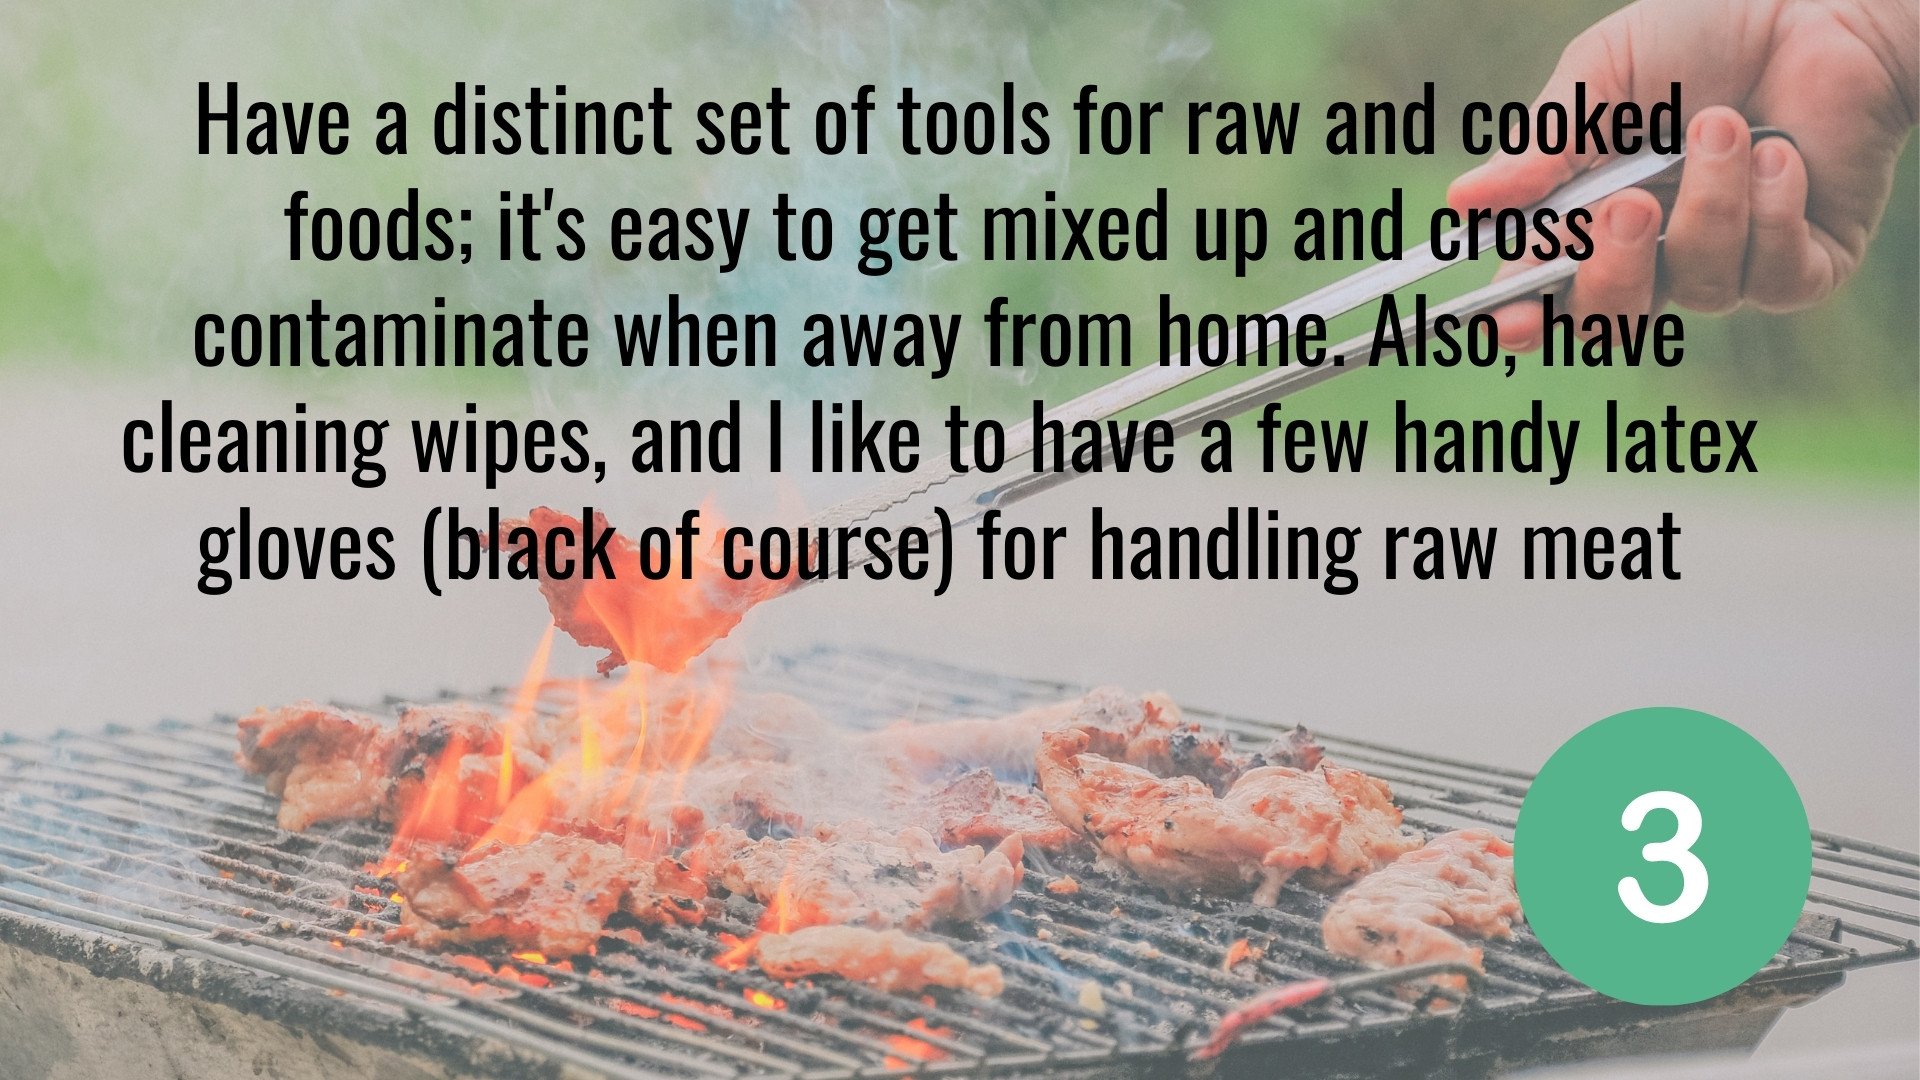 Top 10 Tips to BBQ on the Move4.jpg